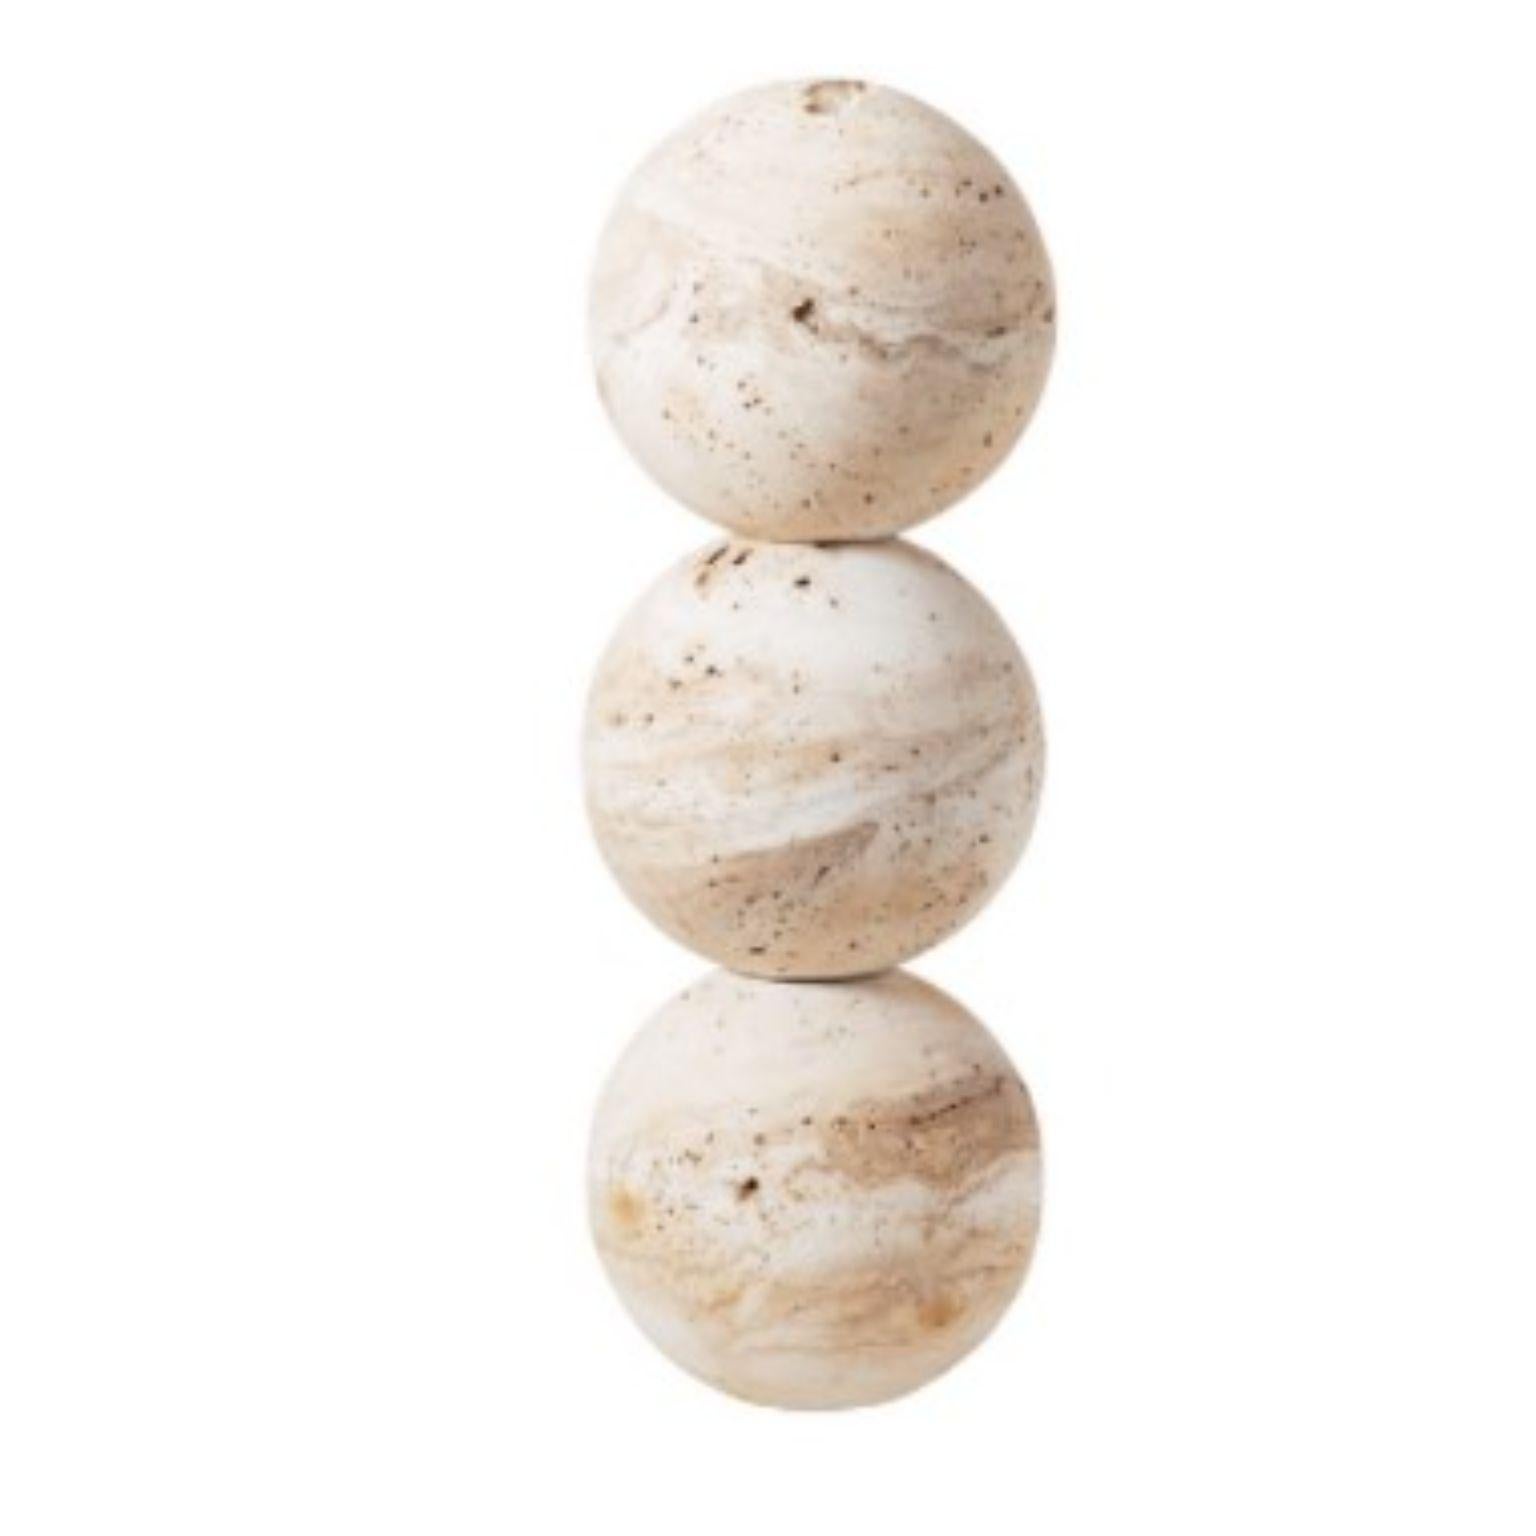 Jupiter 3 by Turbina
Future archeology
Dimensions: Ø 19.5 cm x H58.5 cm
Materials: MDF

Jupiter project arises from the idea of the stone as symbol of sacredness. Therefore Jupiter is a modular piece composed by spheres and semi spheres stacked